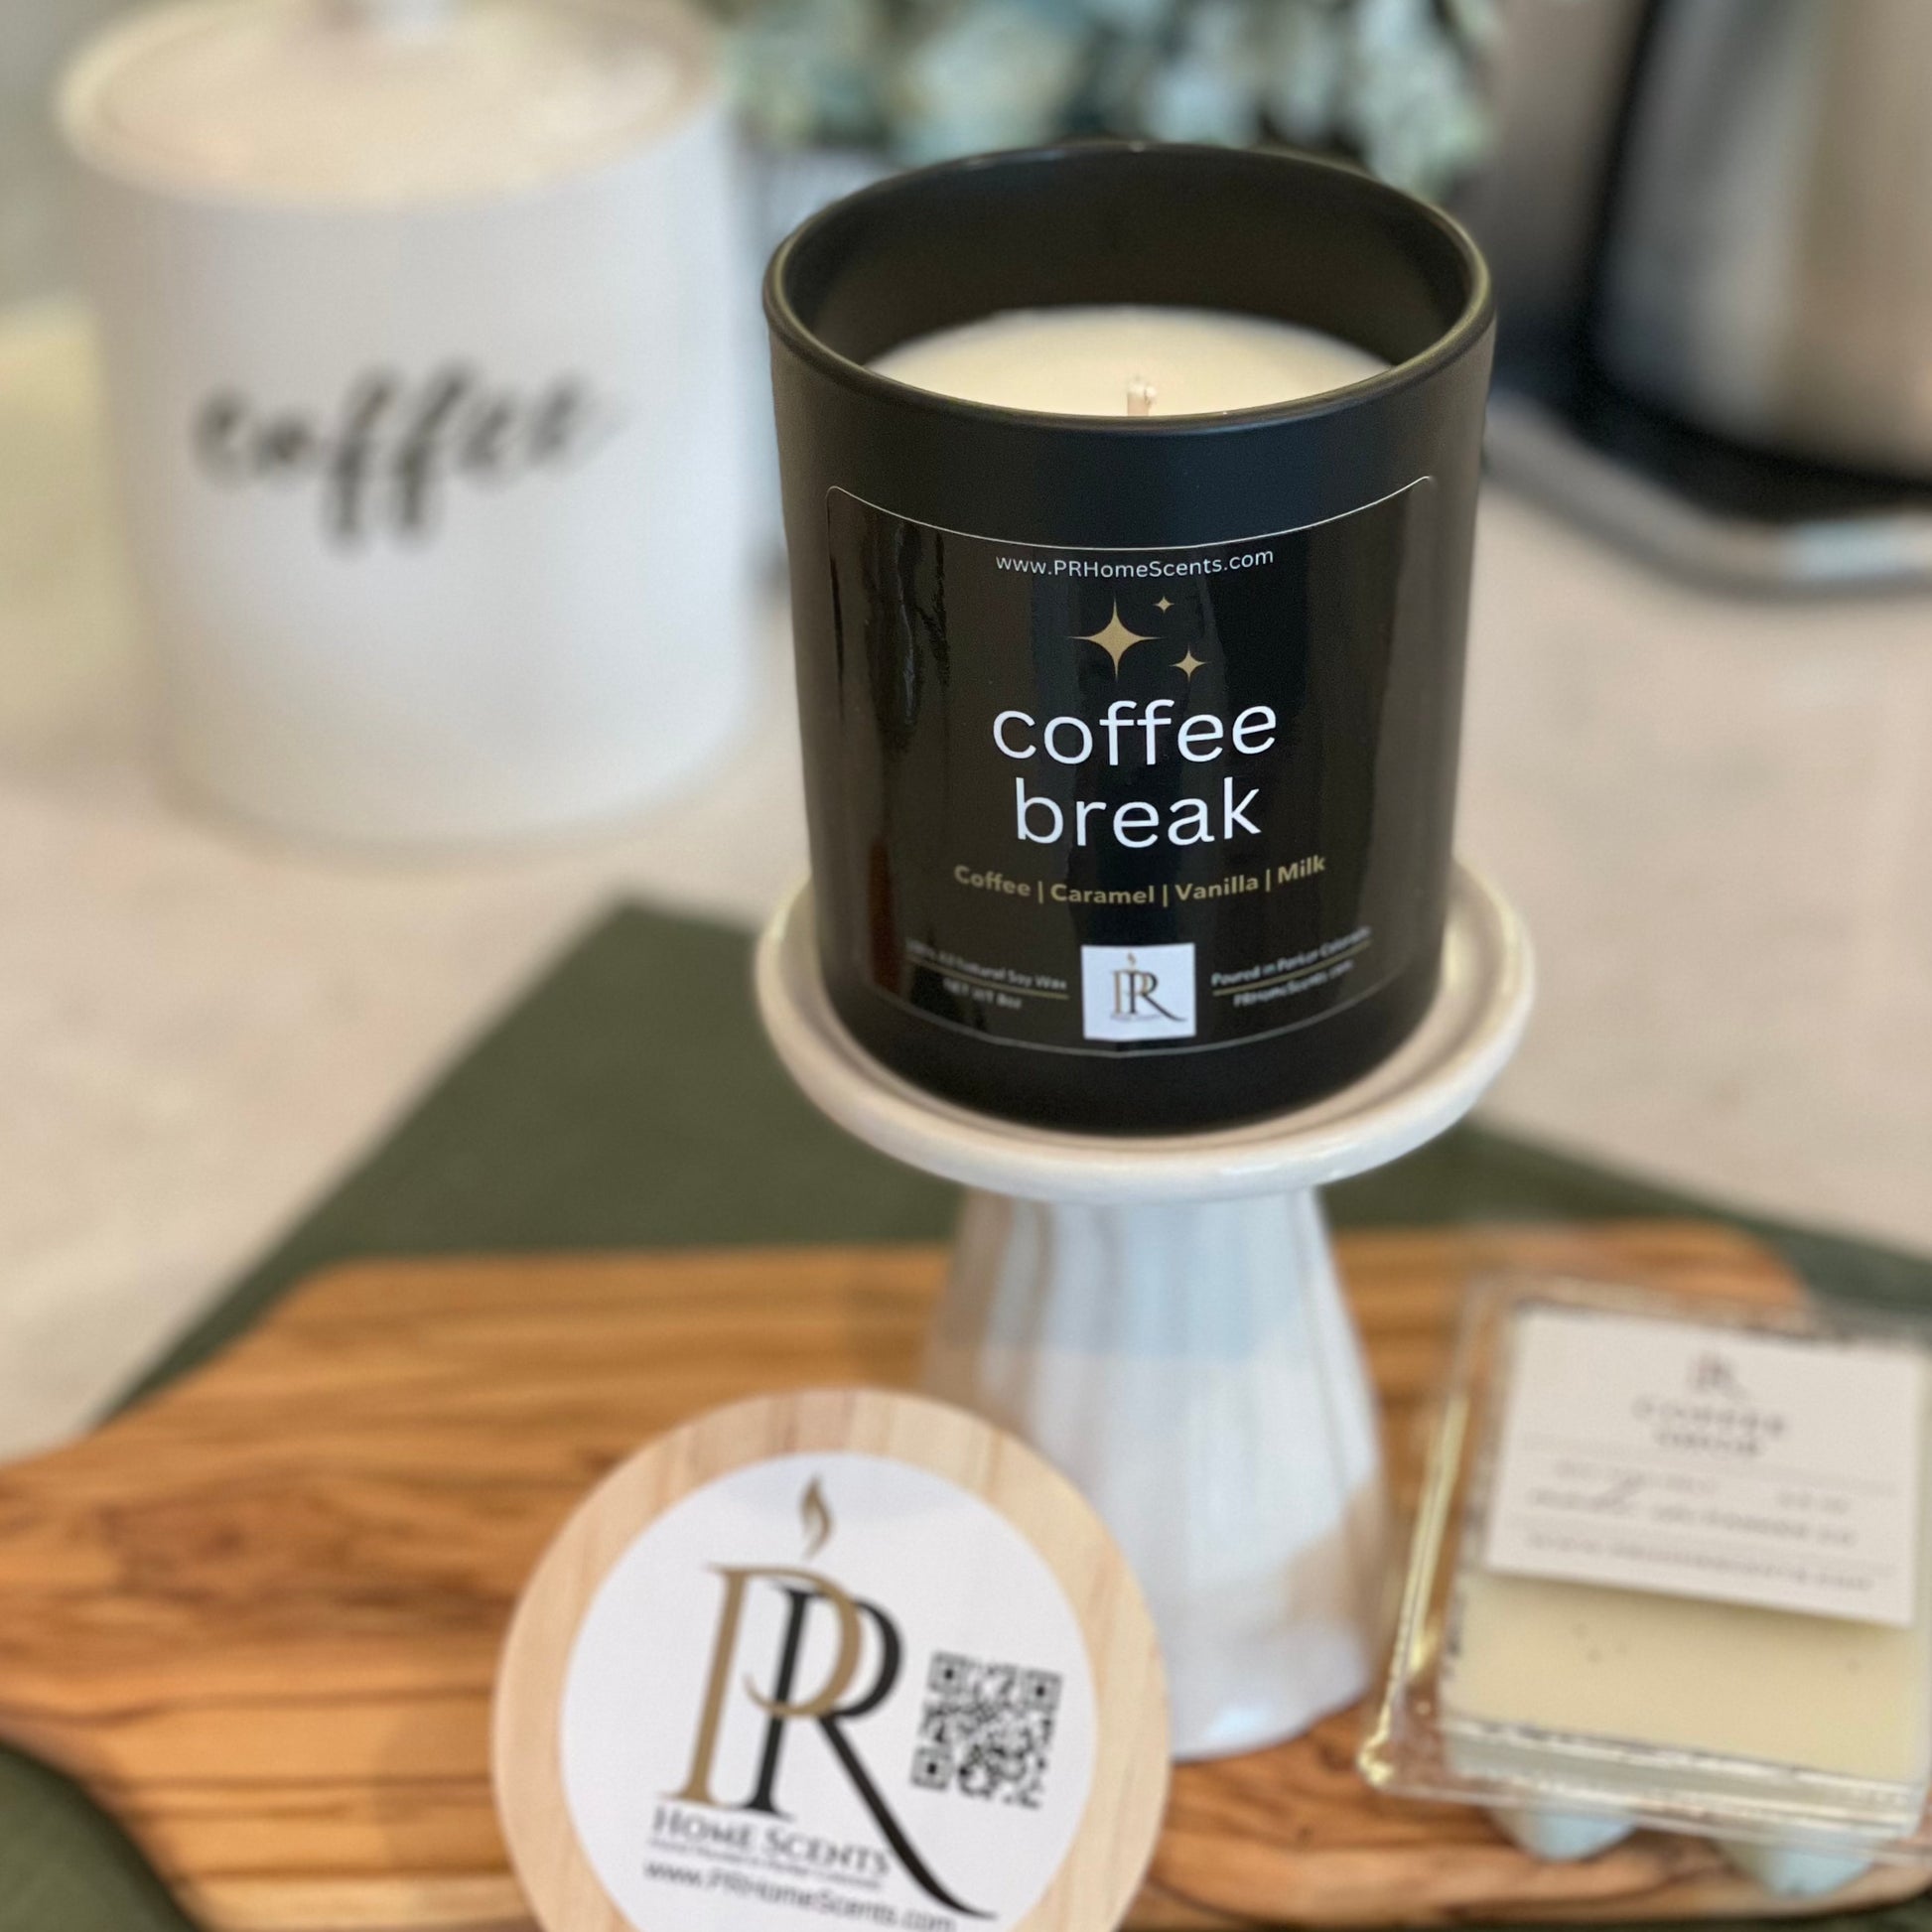 Take a break with our 'Coffee Break' soy candle. Embrace the aroma of fresh coffee, sweet vanilla, sugar, milk, and a hint of suede. Crafted for cozy moments, enjoy its comforting scent wherever you need a warm, inviting atmosphere. ☕🕯️ #CoffeeBreak #SoyCandle #CozyVibes